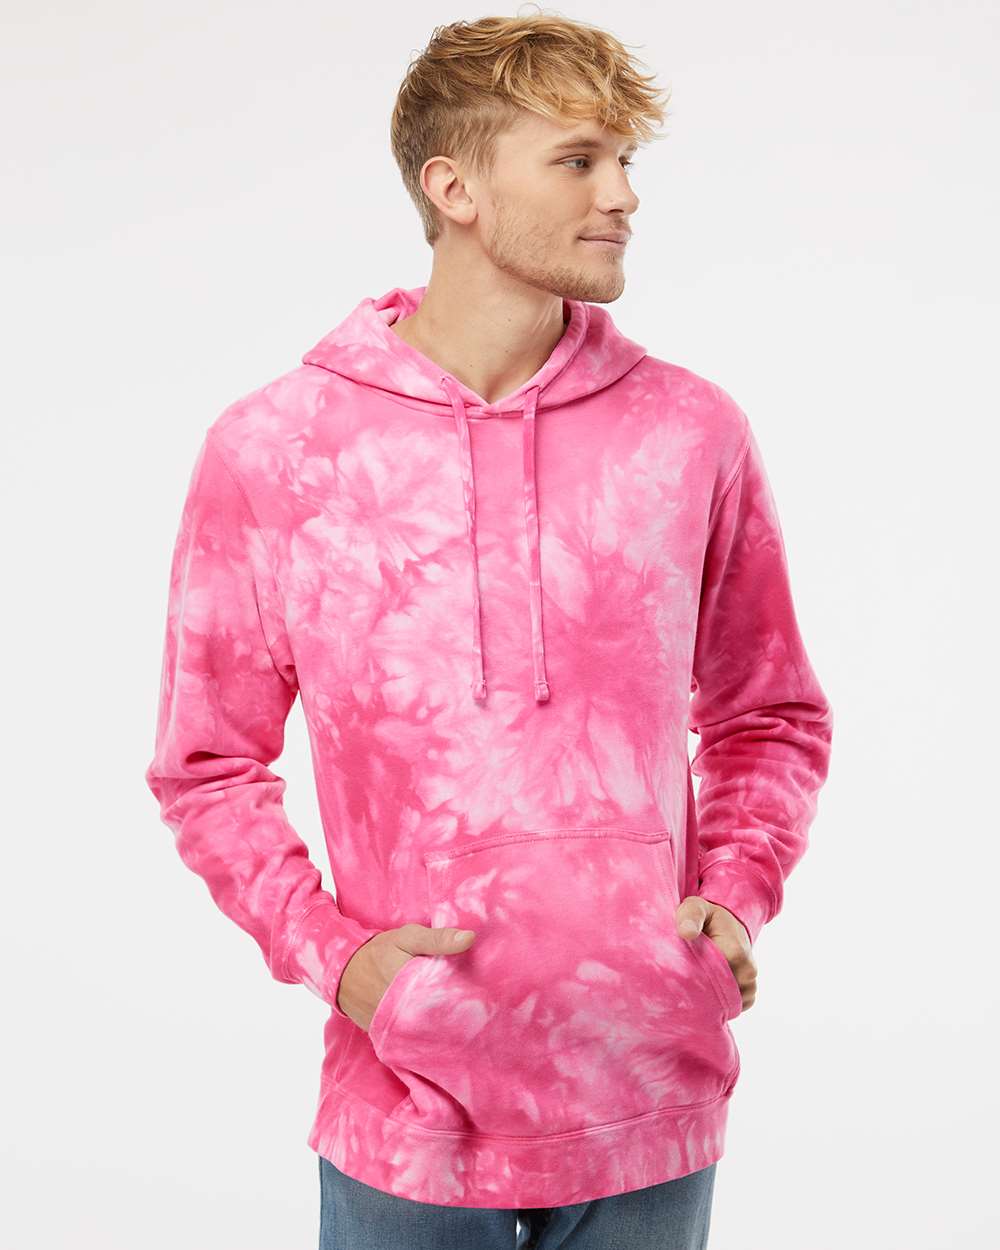 Independent Trading Co. Unisex Midweight Tie-Dyed Hooded Sweatshirt PRM4500TD #colormdl_Tie Dye Pink